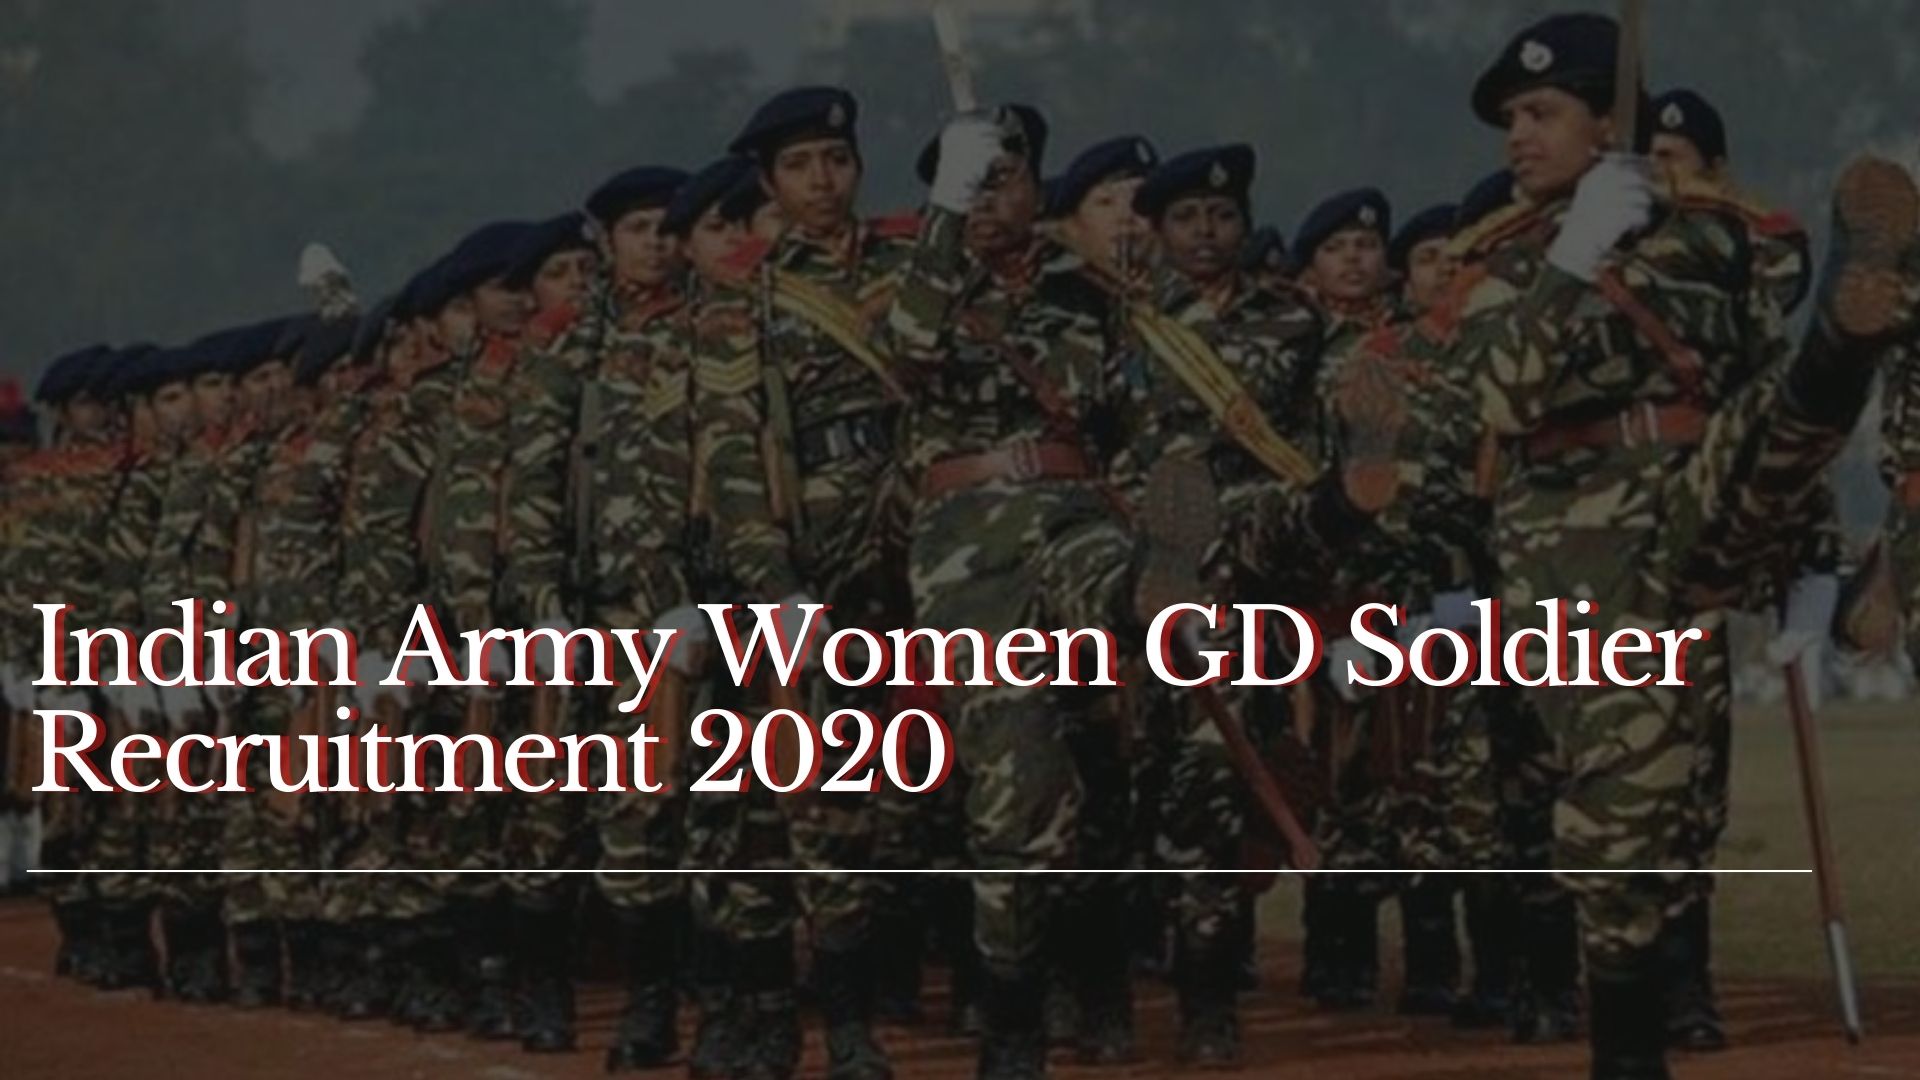 Indian Army Women GD Soldier Recruitment 2020